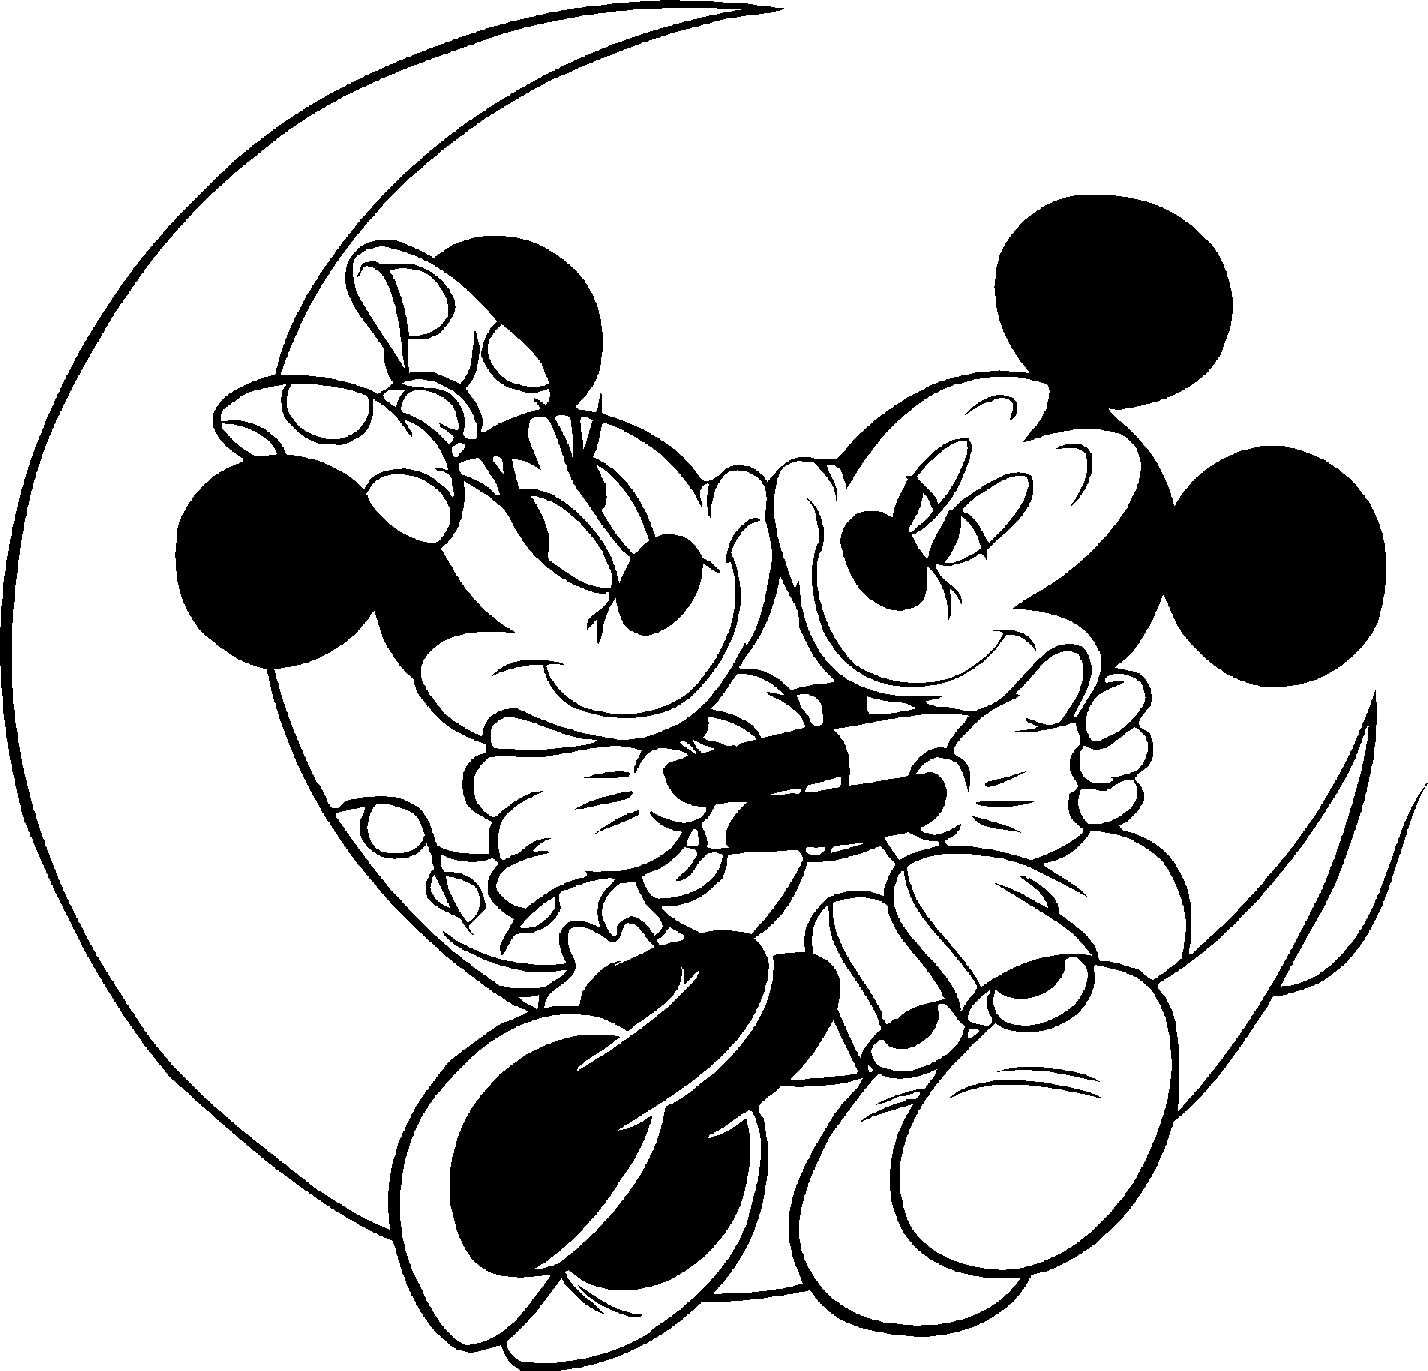 Download Free Printable Mickey Mouse Coloring Pages For Kids